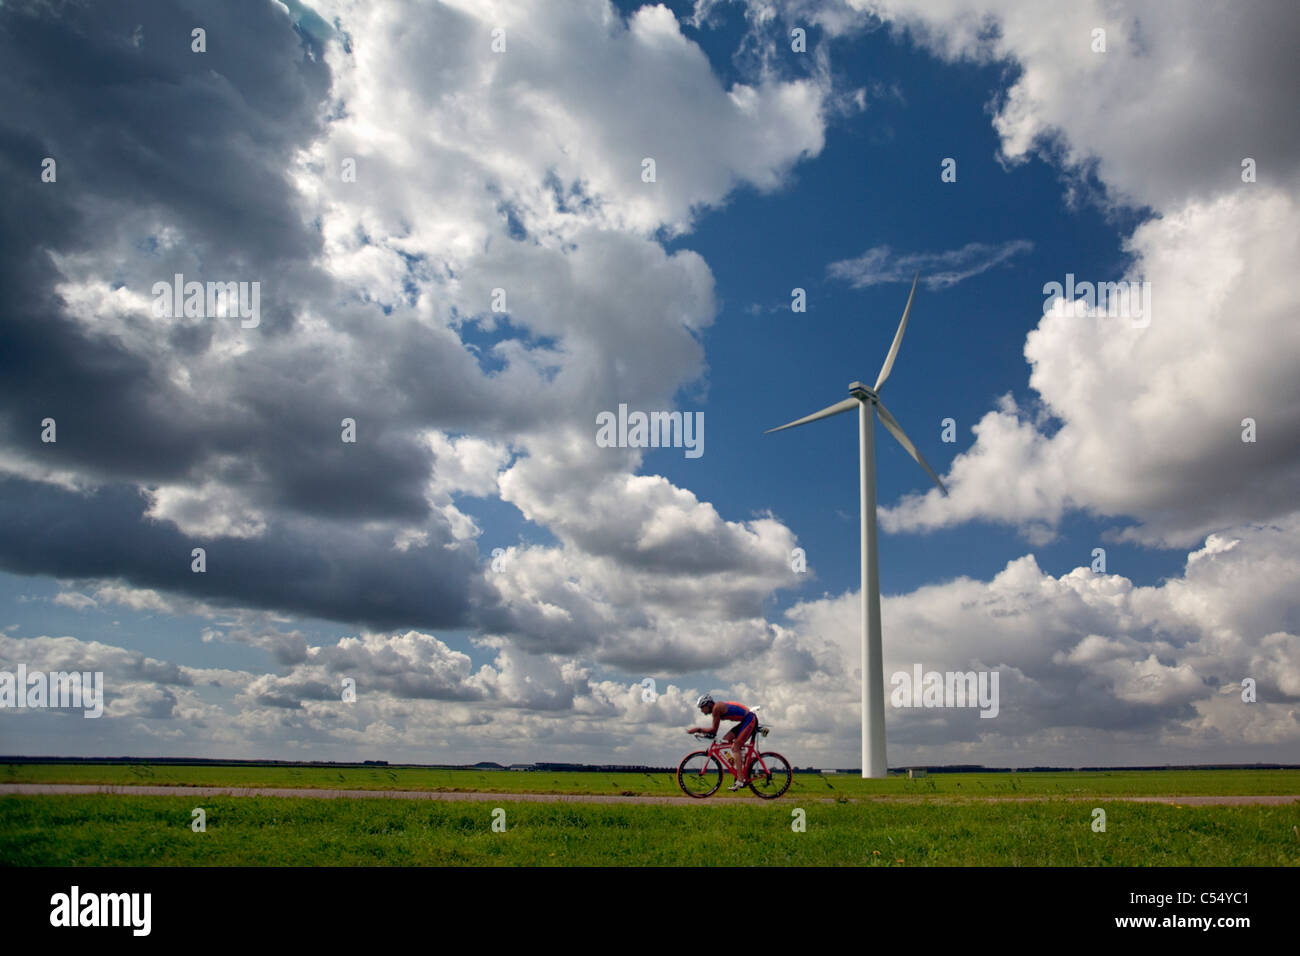 The Netherlands, Almere, Triathlon, cycling Stock Photo